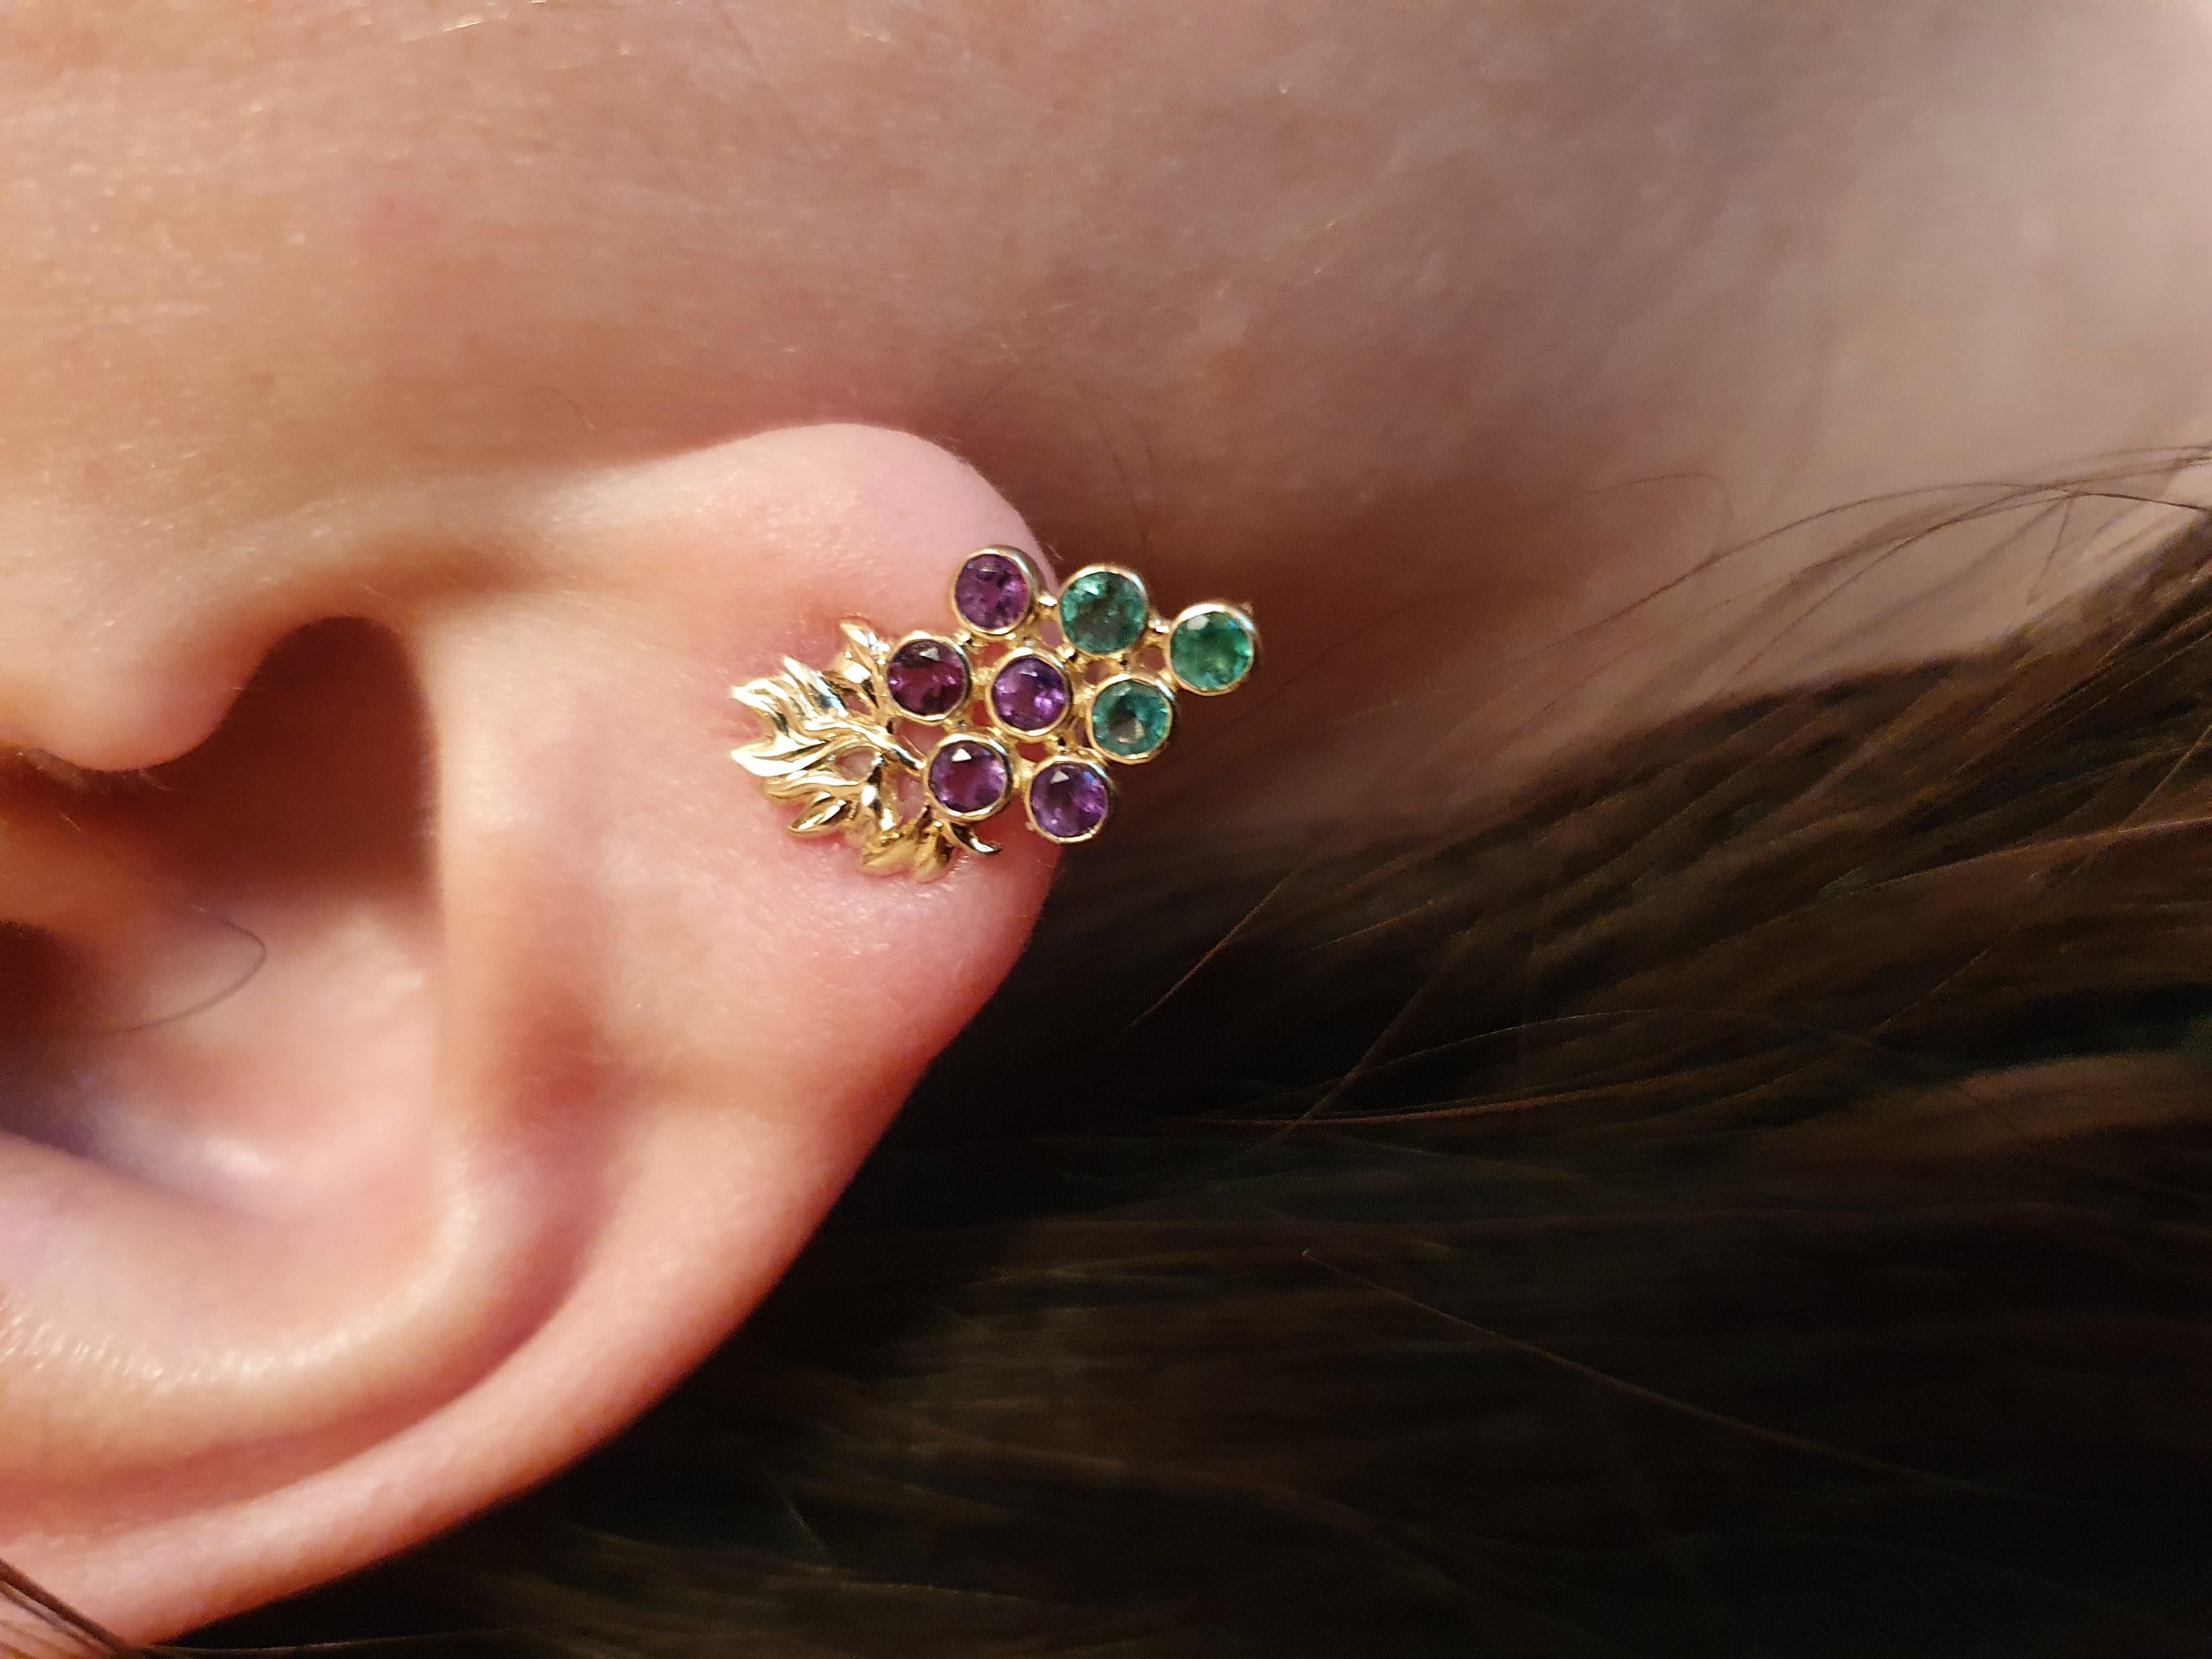 Women's Grape Earrings with emeralds and amethysts in 14k gold.  For Sale